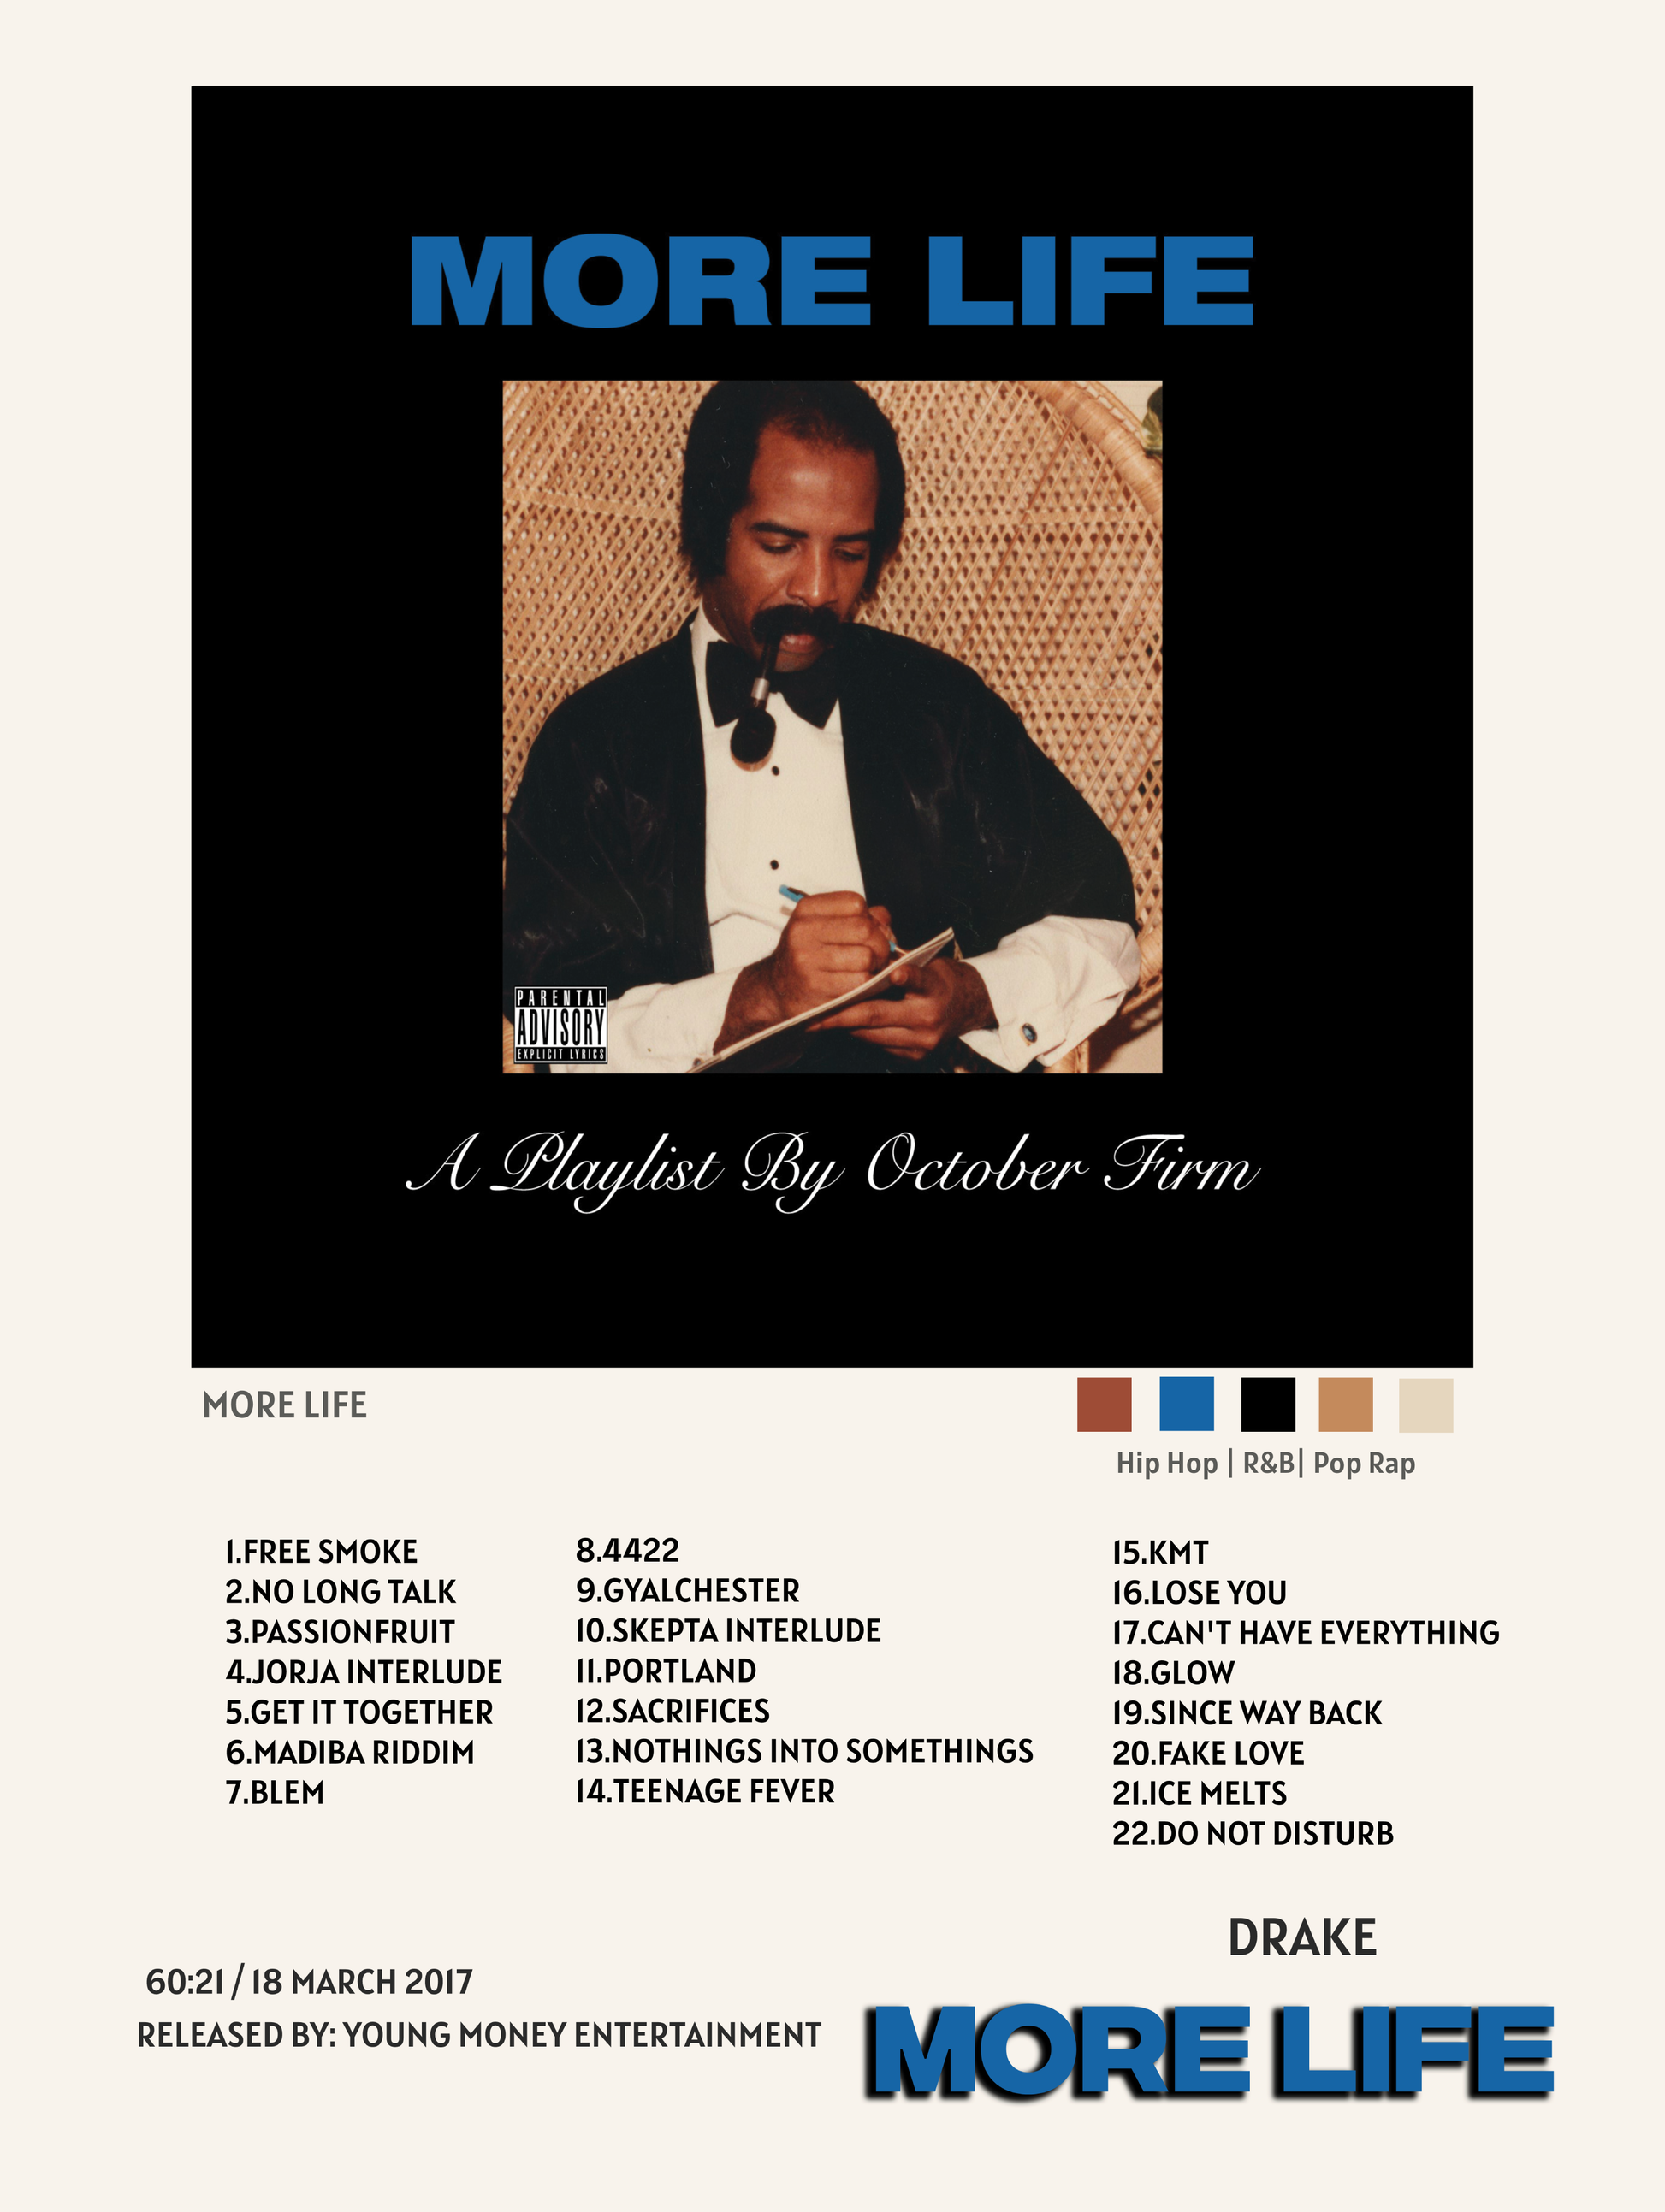 According 2 Hip-Hop - 5 years ago today Drake released “More Life